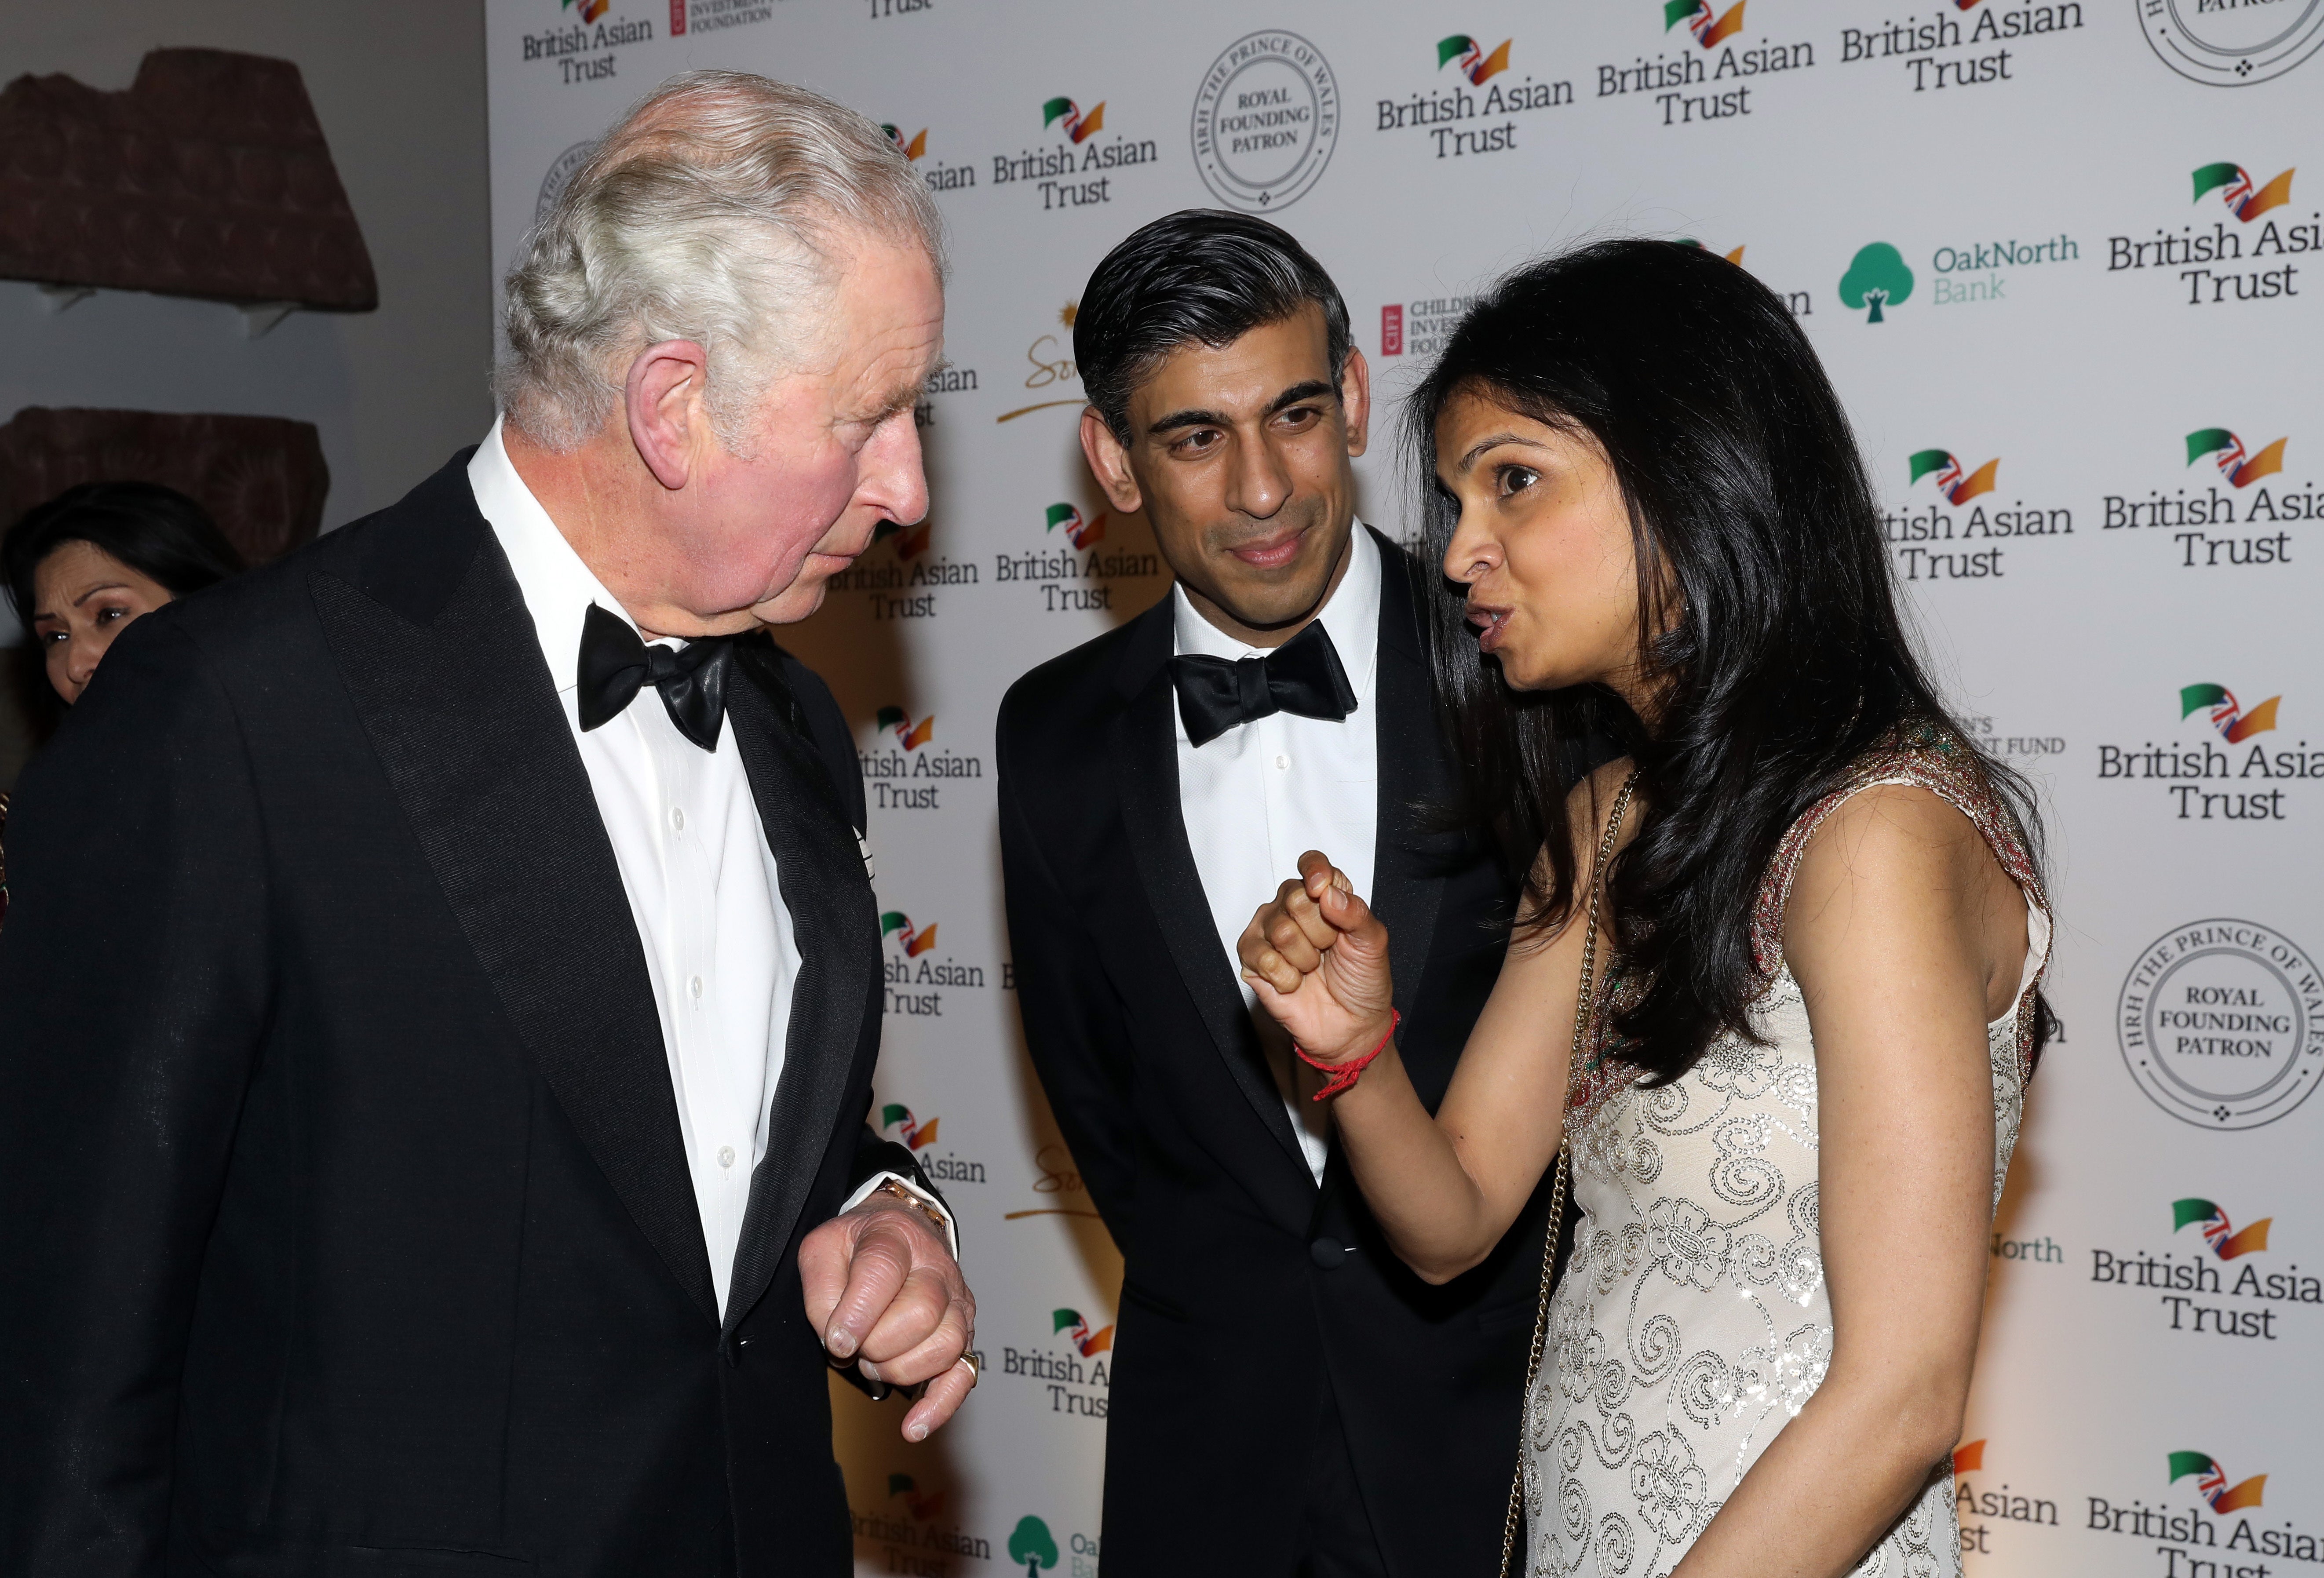 The Prince of Wales speaks to Chancellor Rishi Sunak and his wife Akshata Murthy at the British Asian Trust reception (PA)